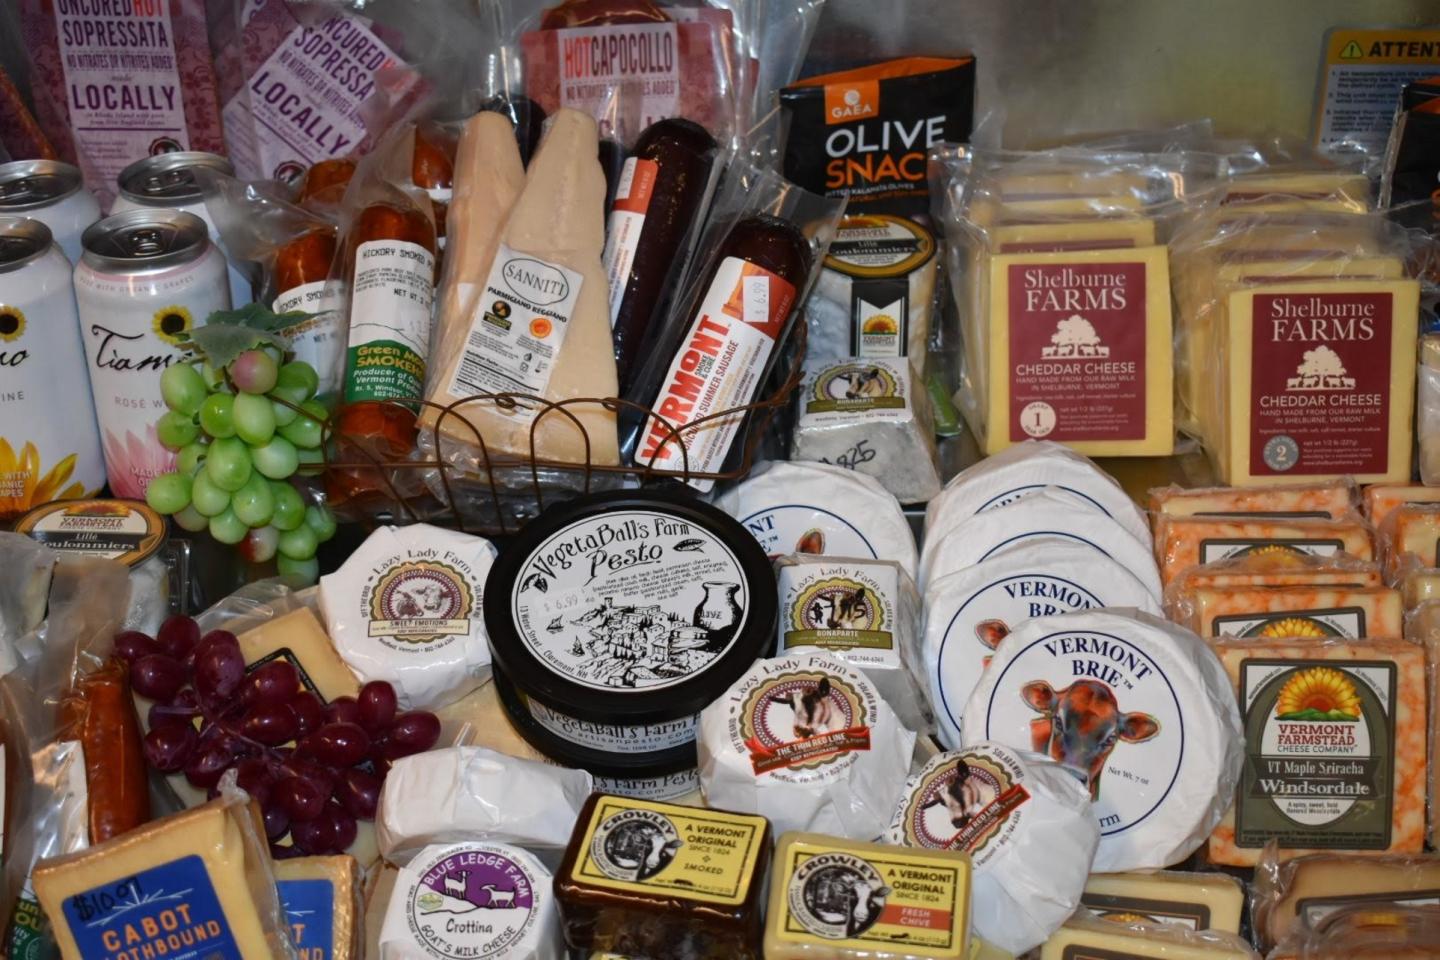 The Best of Vermont from The Vermont Country Store to your door!